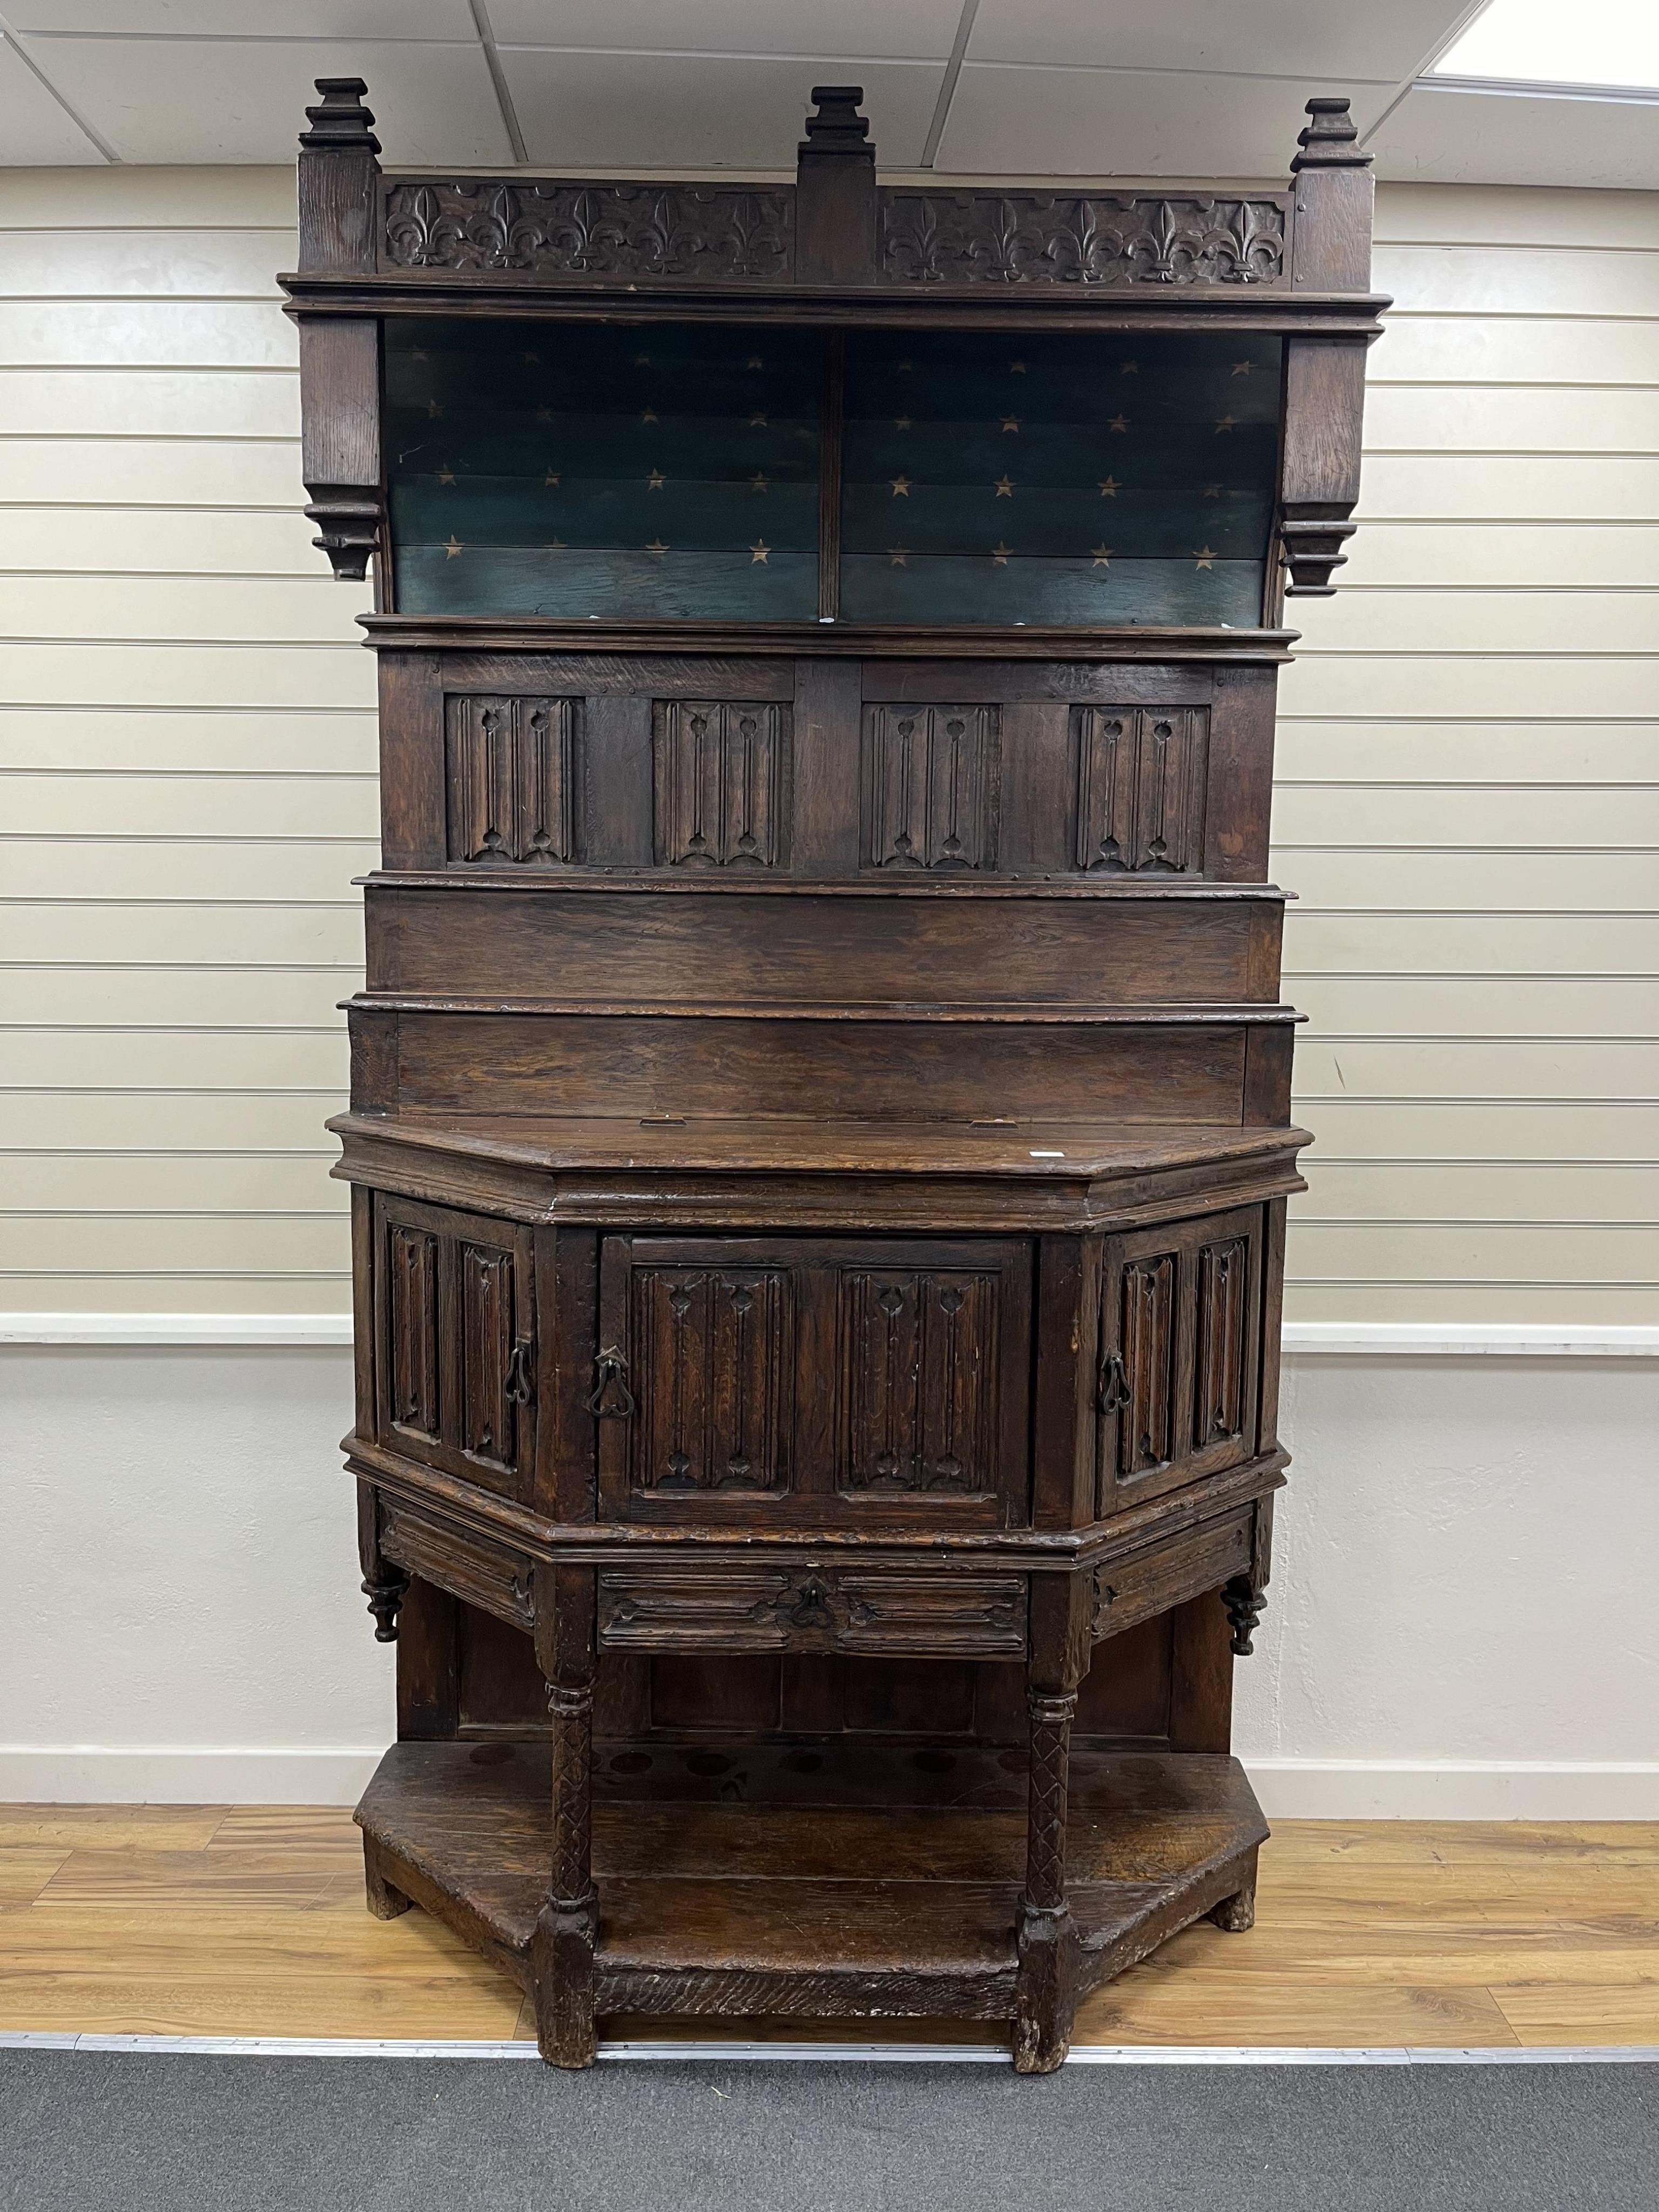 A tall Gothic linenfold panelled oak dresser (dressoir), in 15th century French style, width 143cm, depth 62cm, height 252cm. Condition - fair to good, Provenance - made for Brede Place, Brede, Rye, East Sussex. Commissi